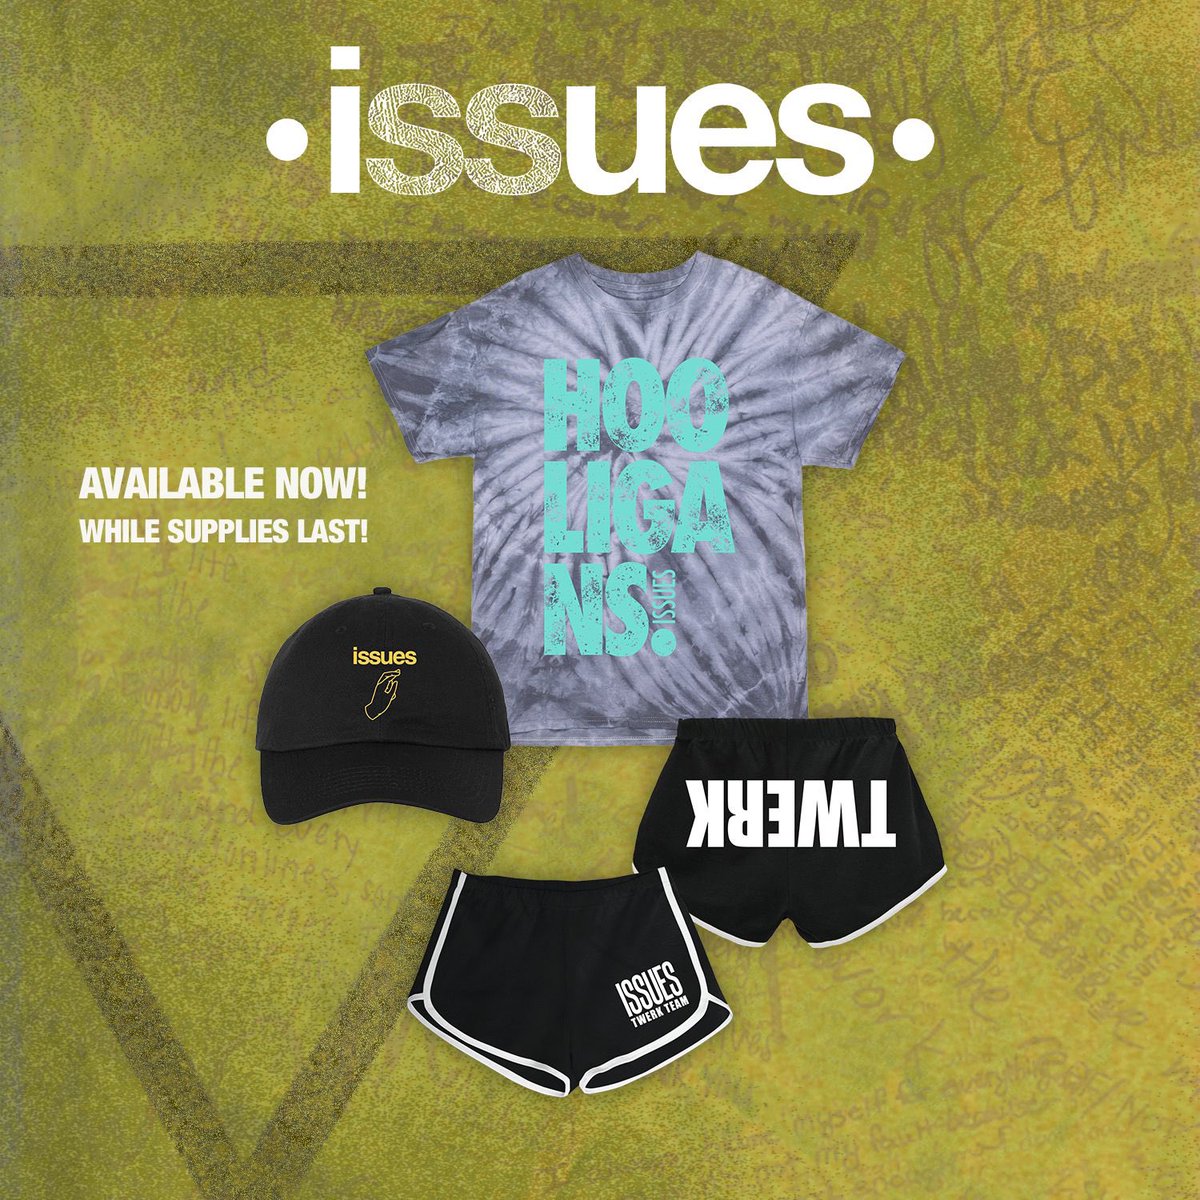 Commemorating & celebrating 10 years of the Issues Self Titled with THE most iconic merch.🕺🏽 #issuestwerkteam ixiimmxxiv.com